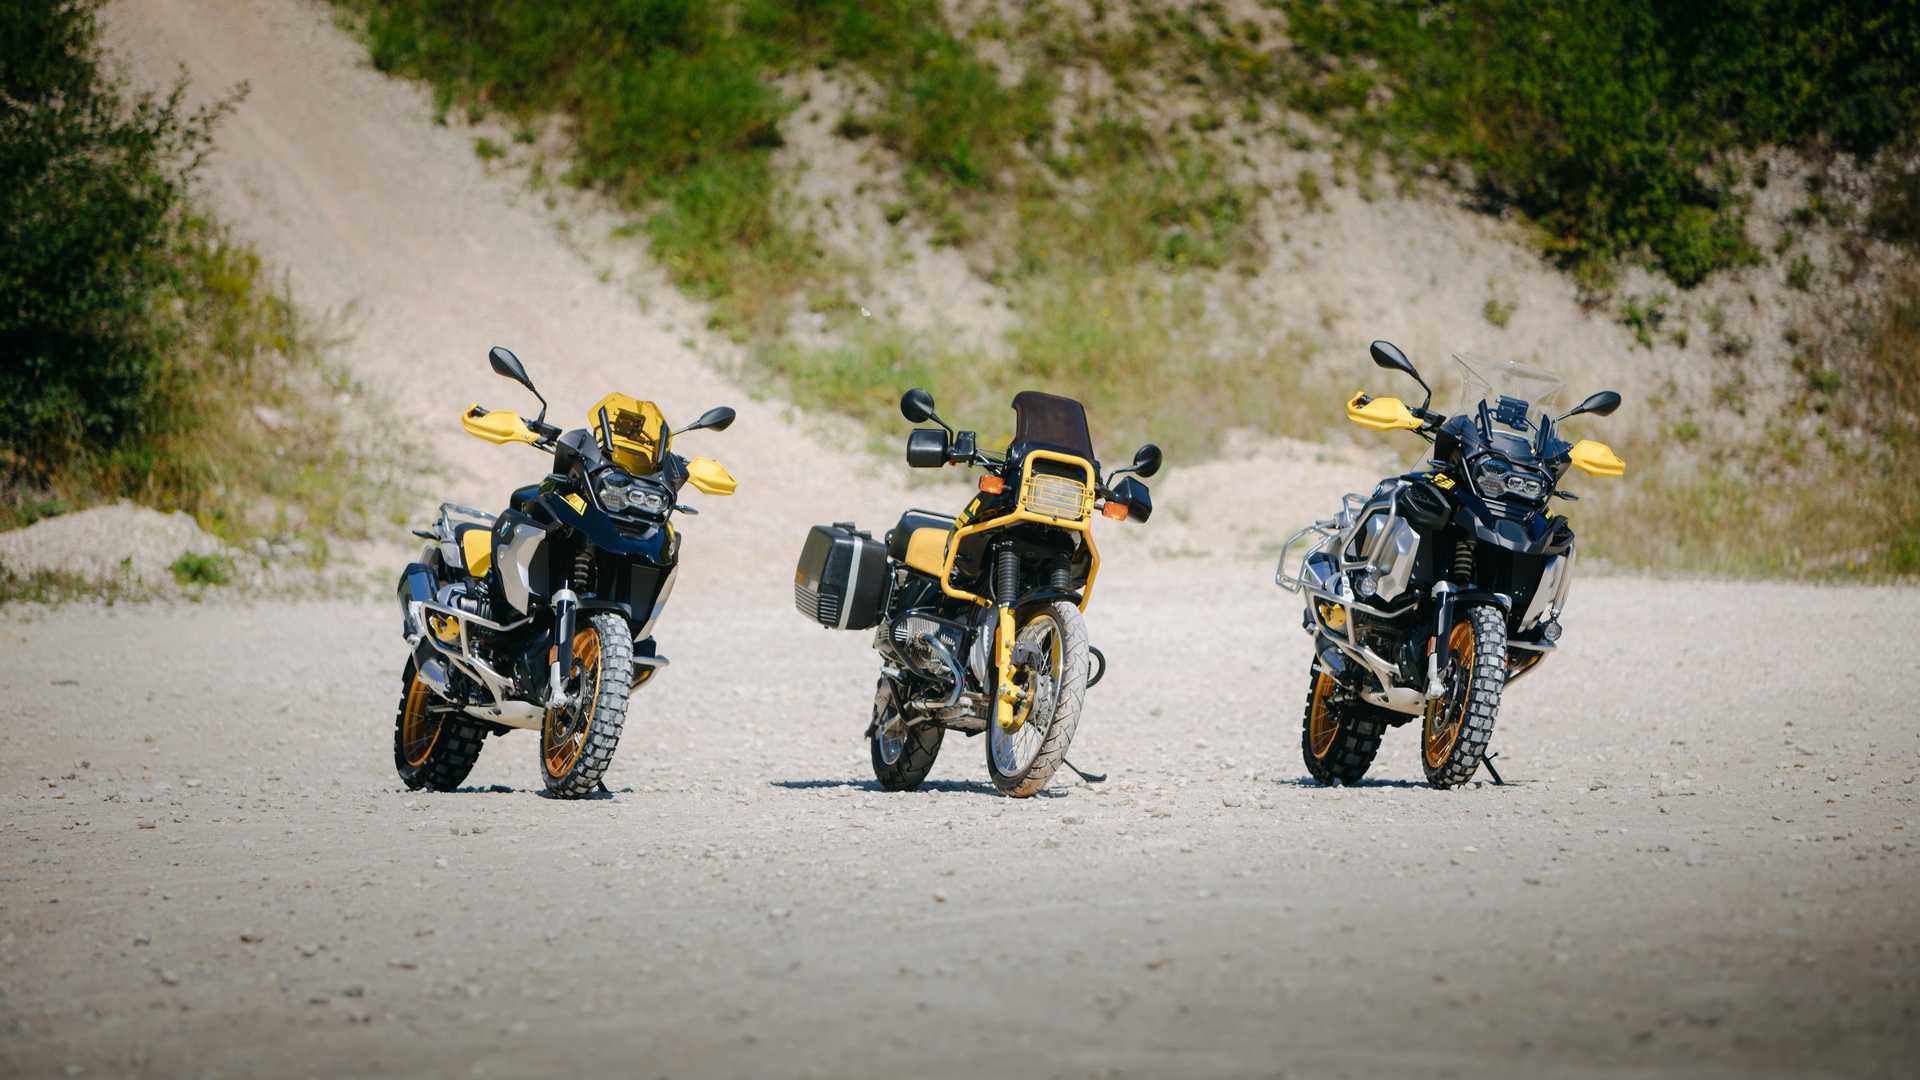 BMW R 1250 GS Family Celebrates 40 Years Of GS